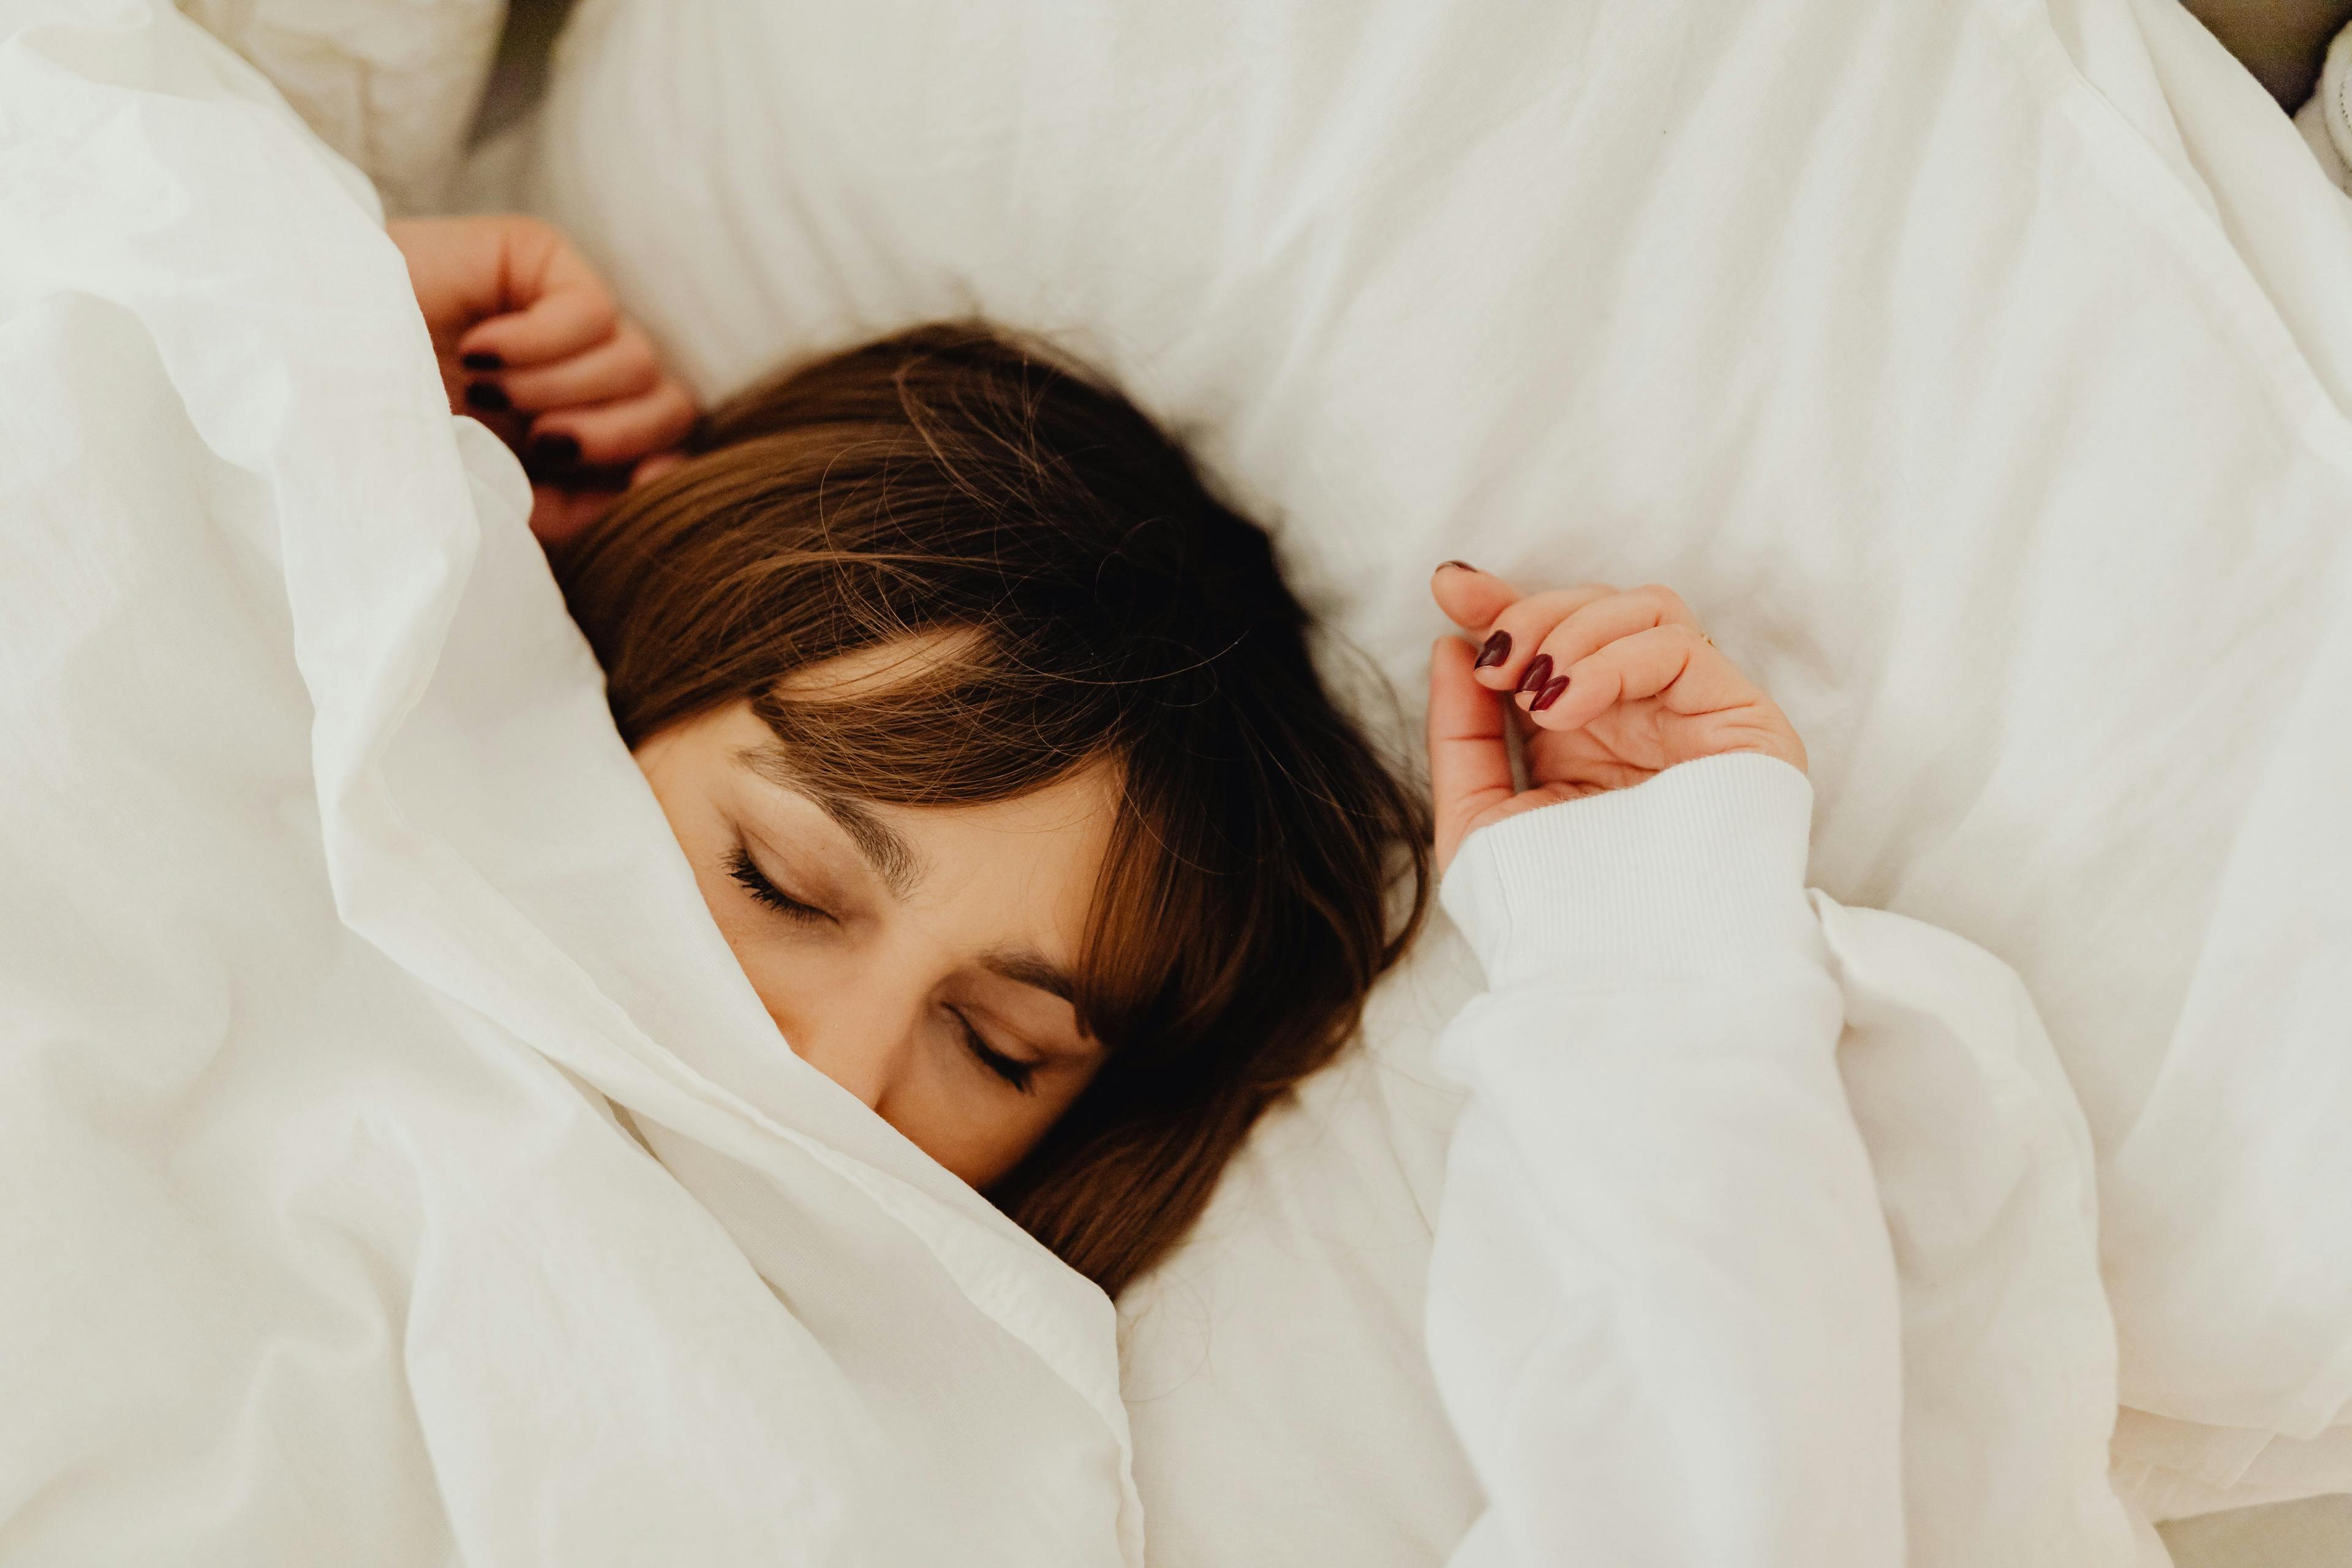 People at Risk of Developing OSA Commonly Withhold Reporting Trouble Sleeping